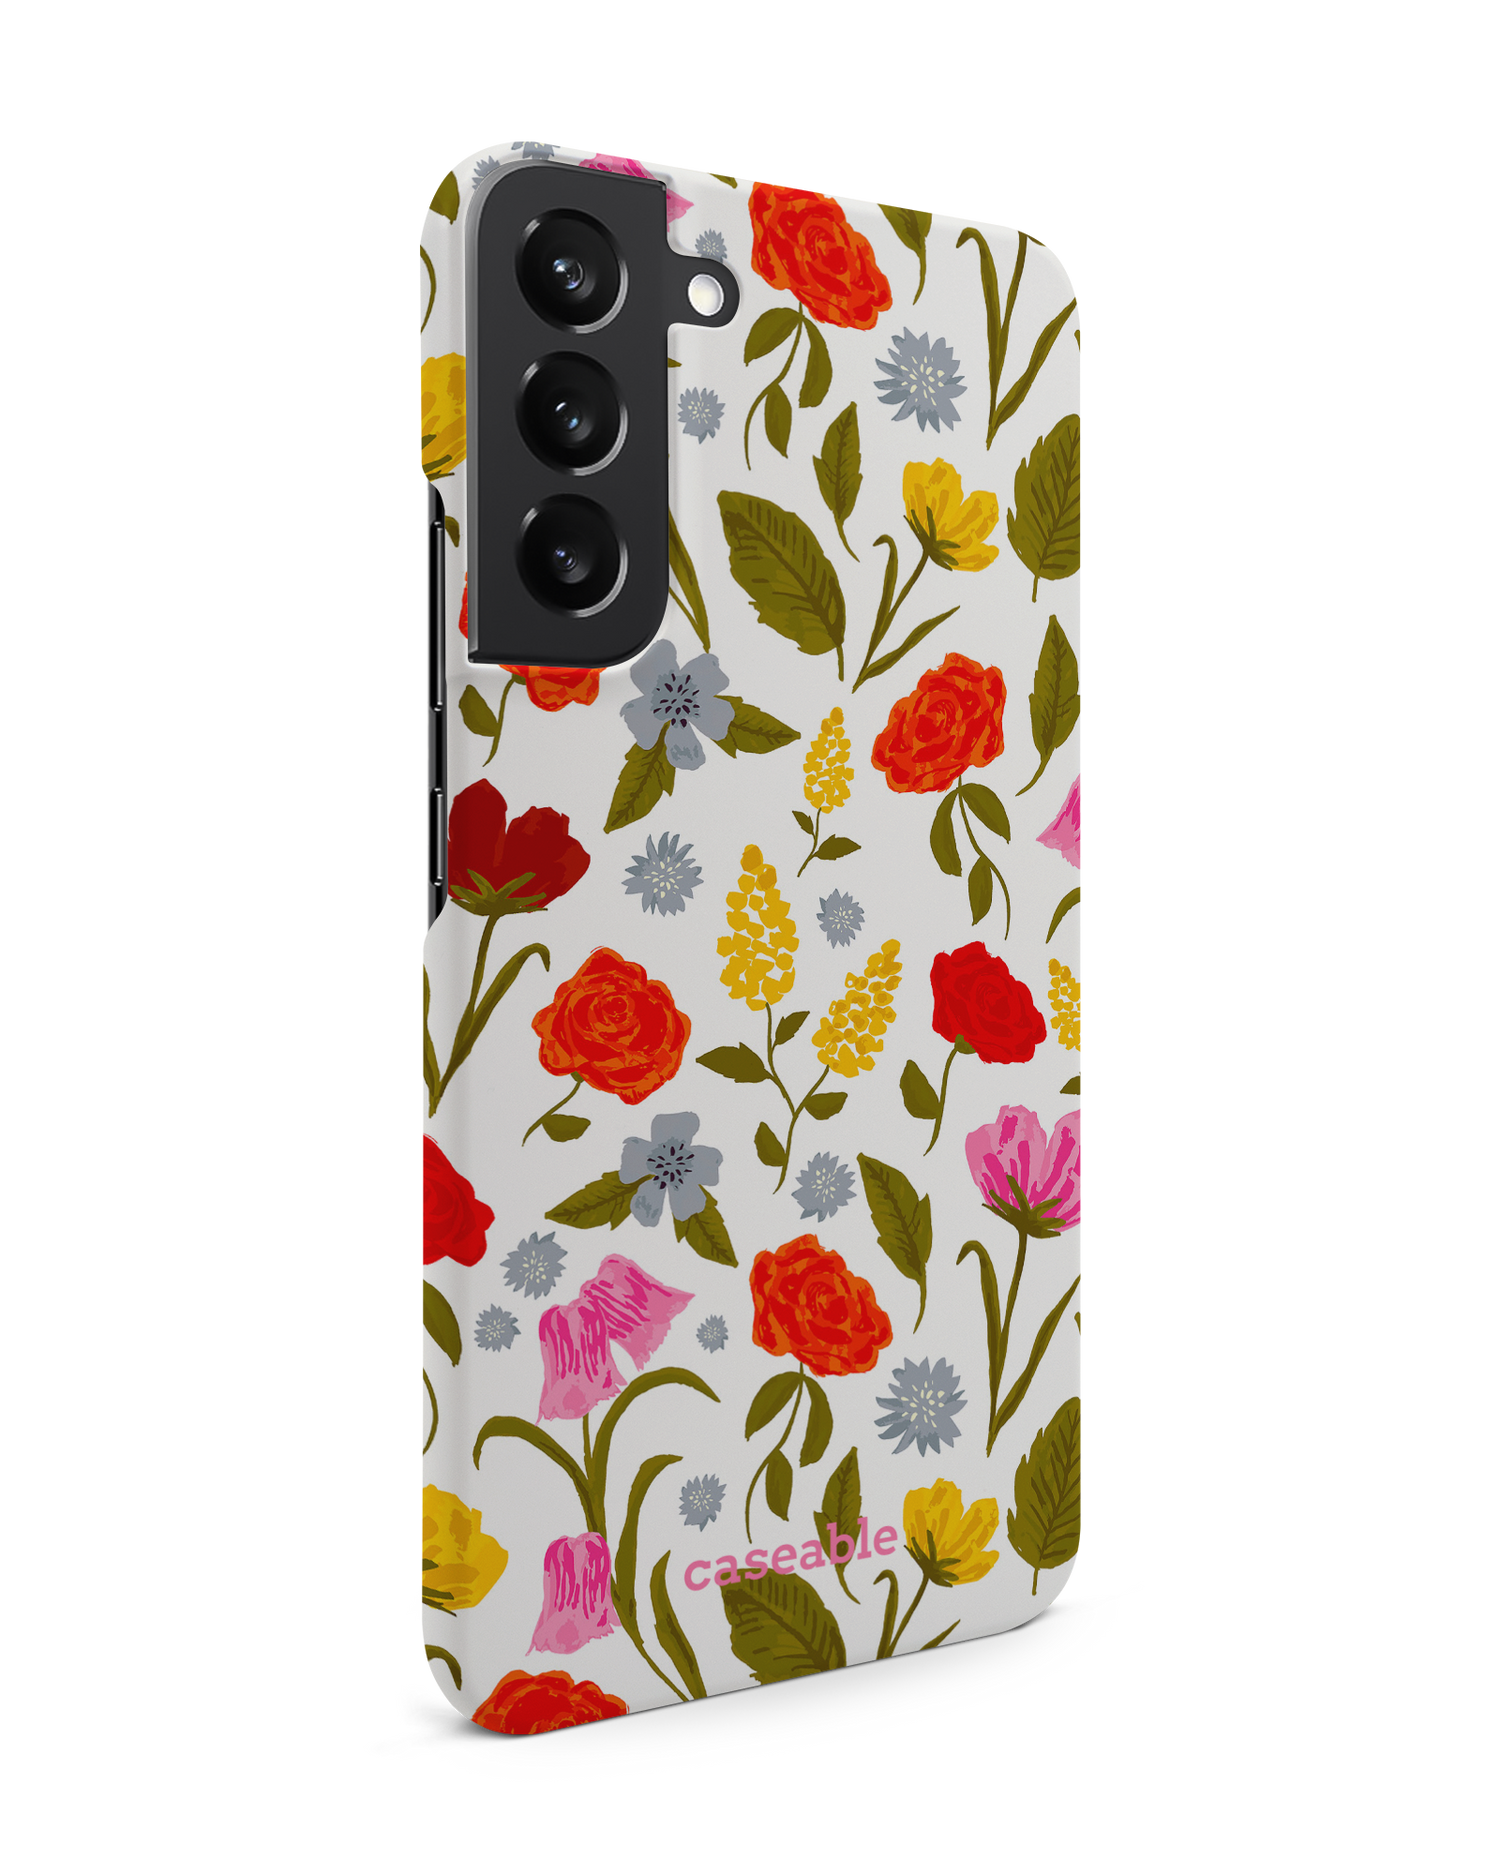 Botanical Beauties Hard Shell Phone Case Samsung Galaxy S22 Plus 5G: View from the left side